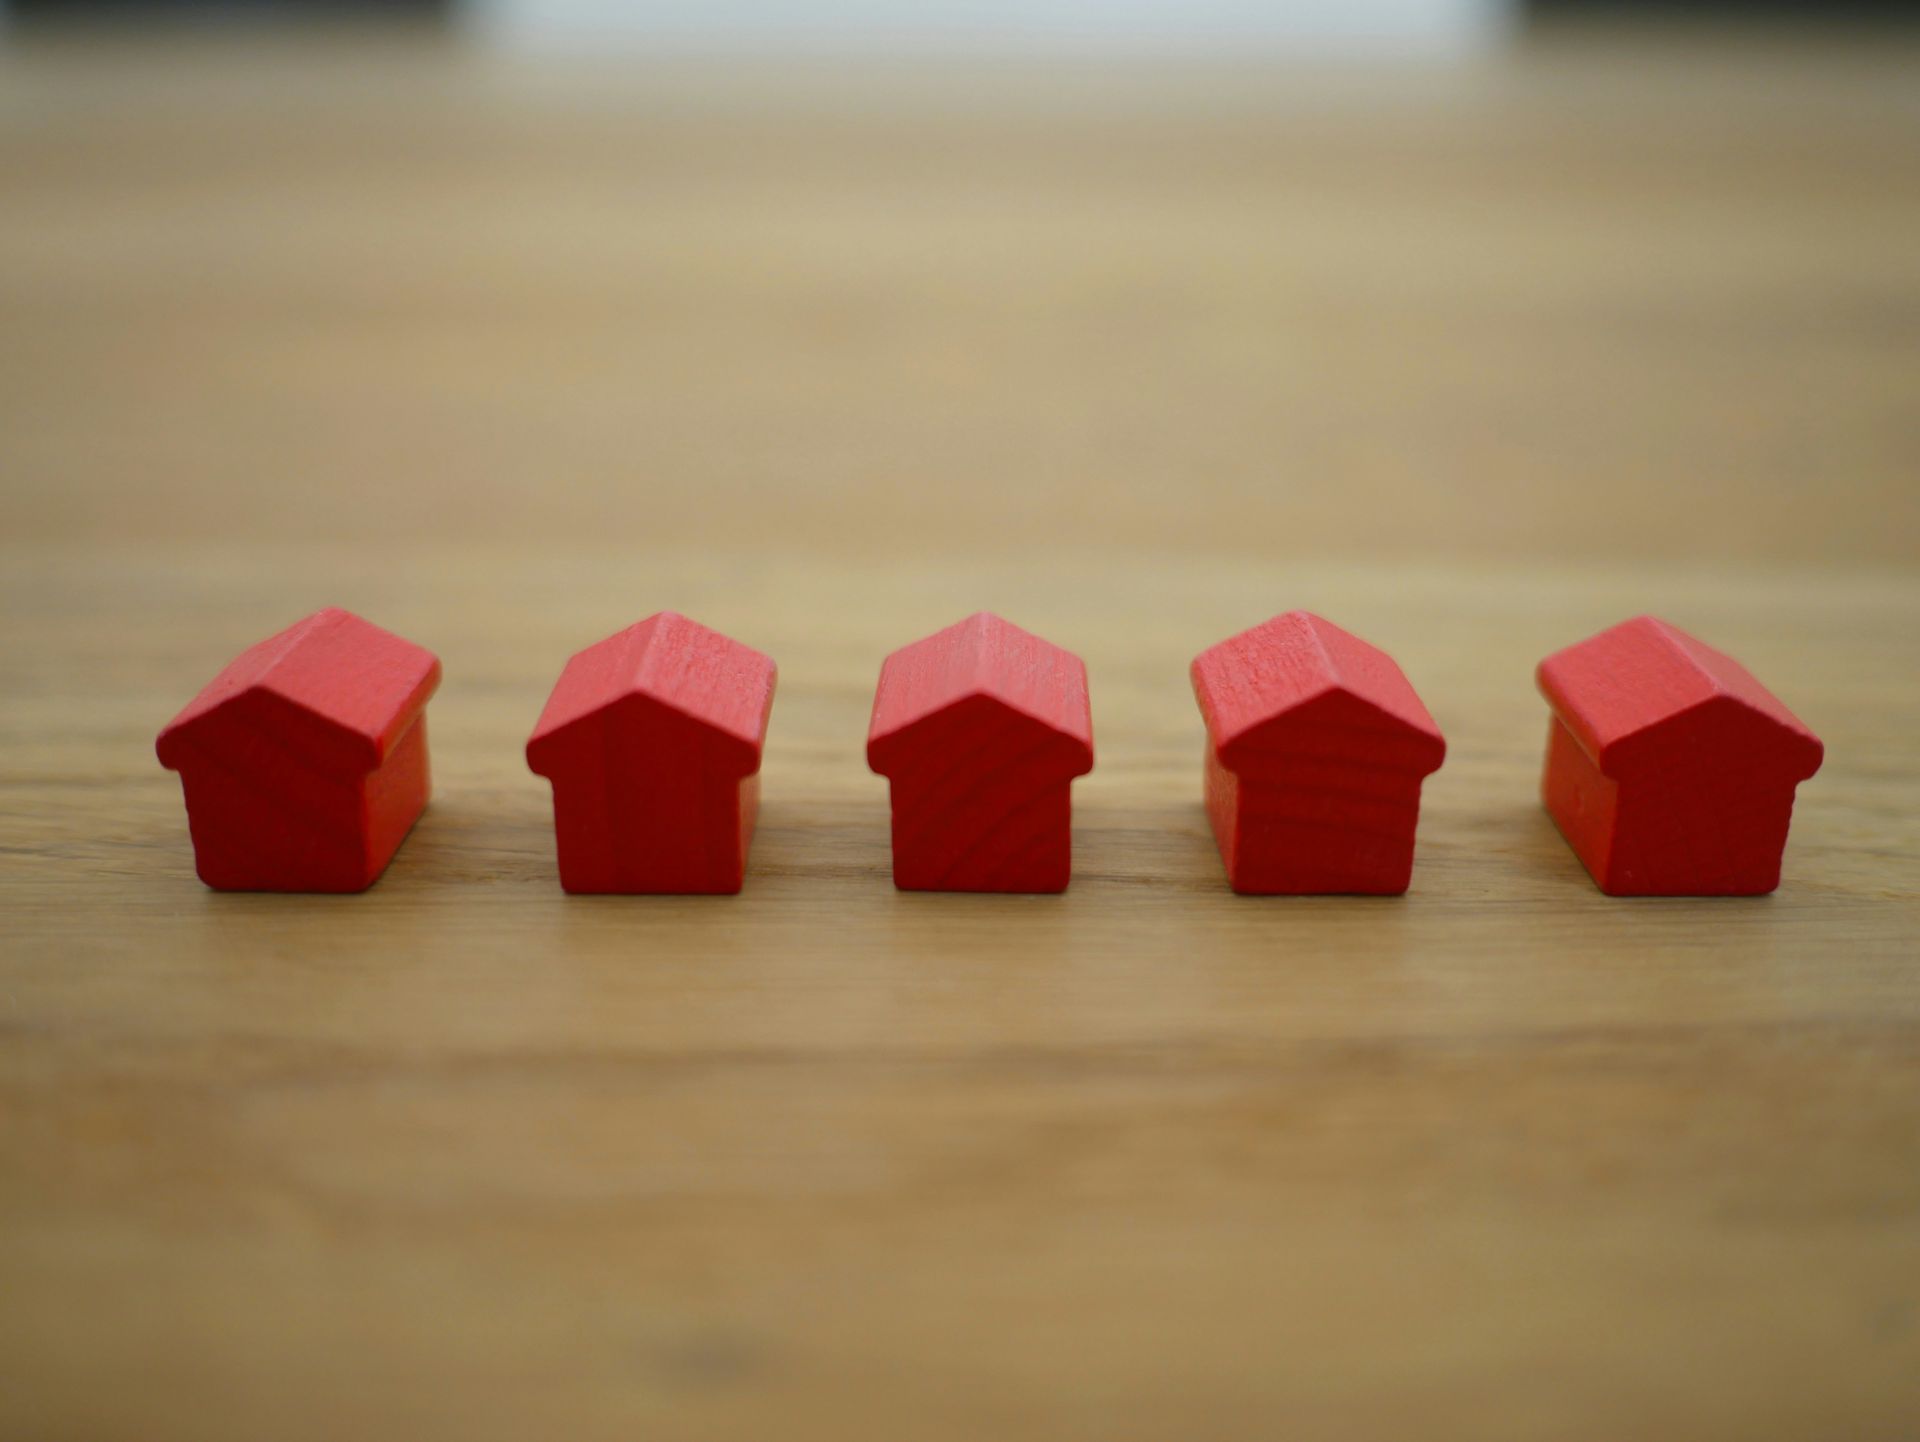 This image shows a line of five small red house-shaped pieces arranged in a row on a wooden surface.